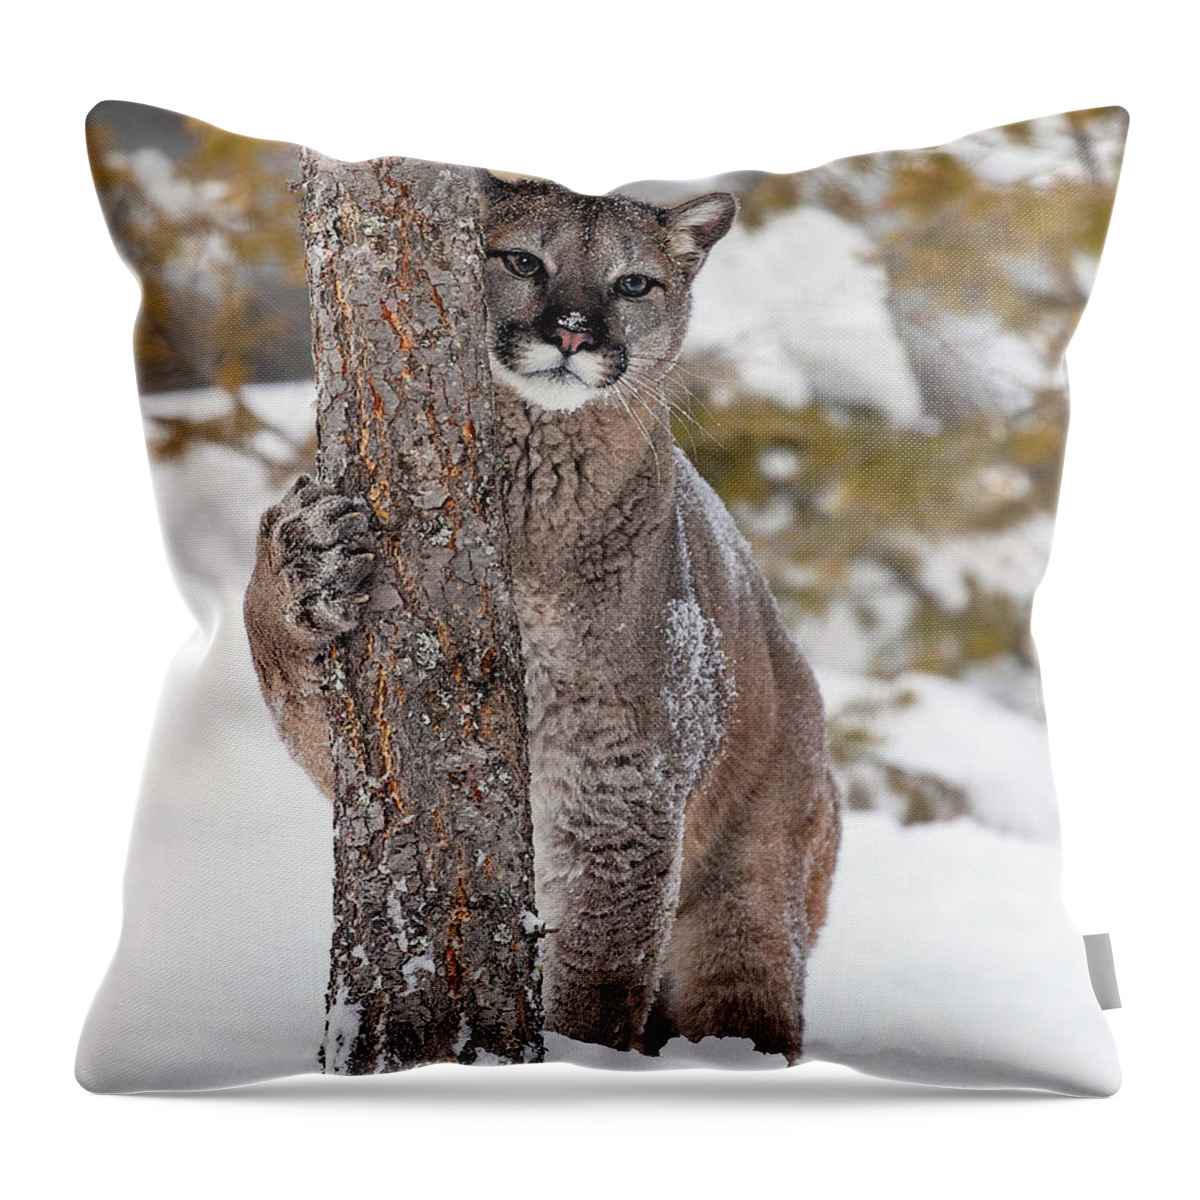 Cougar Throw Pillow featuring the photograph Winter Dreaming by Art Cole